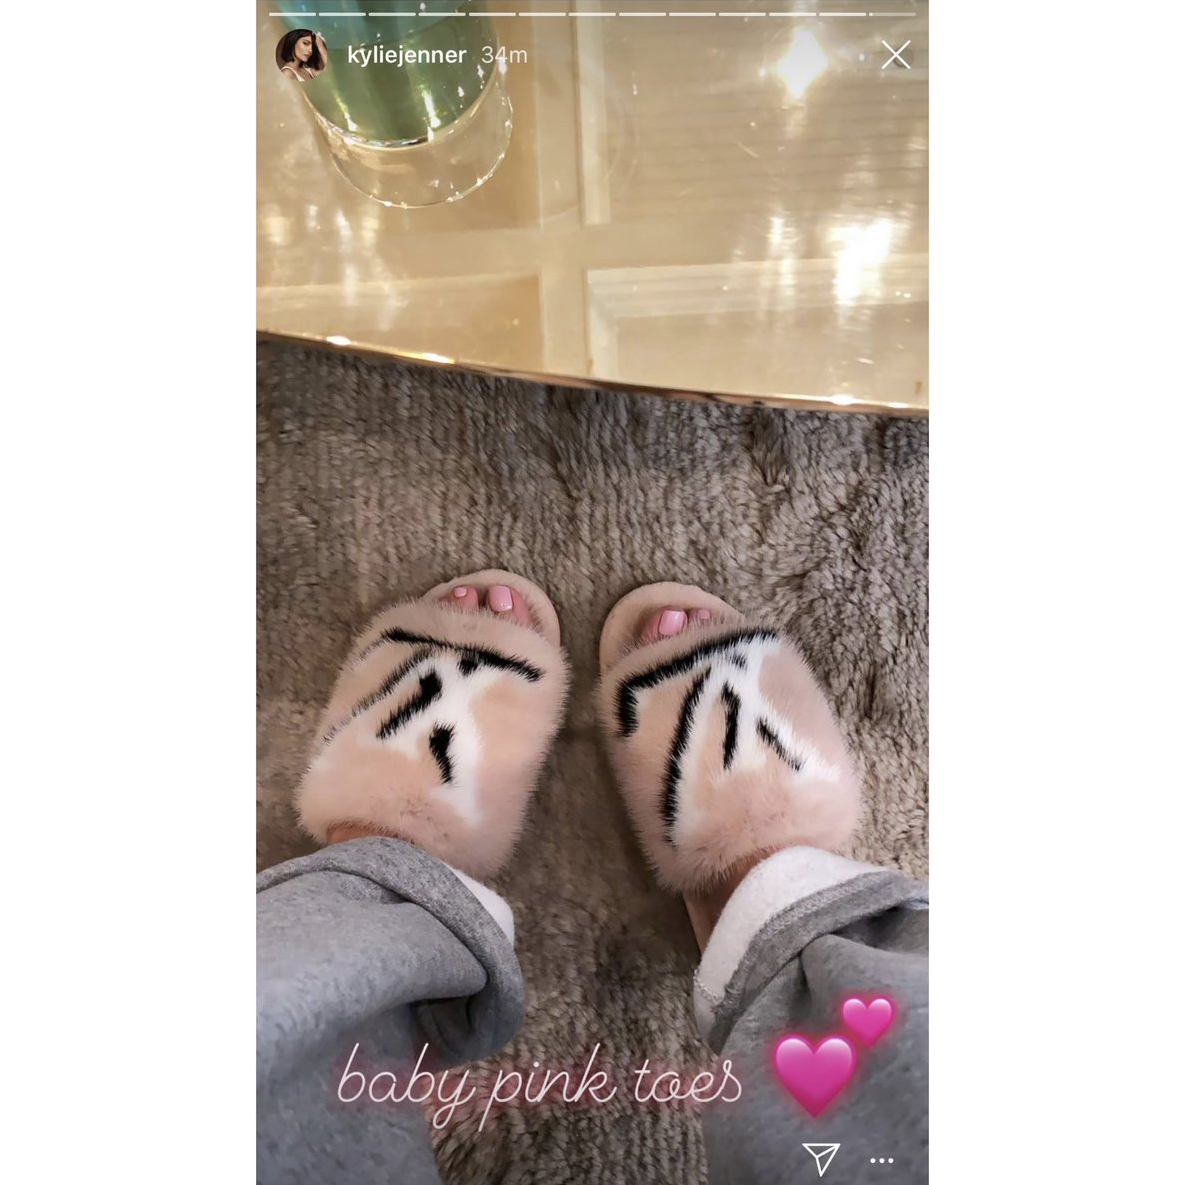 Kylie Jenner's Fur Slippers Get Hate as 